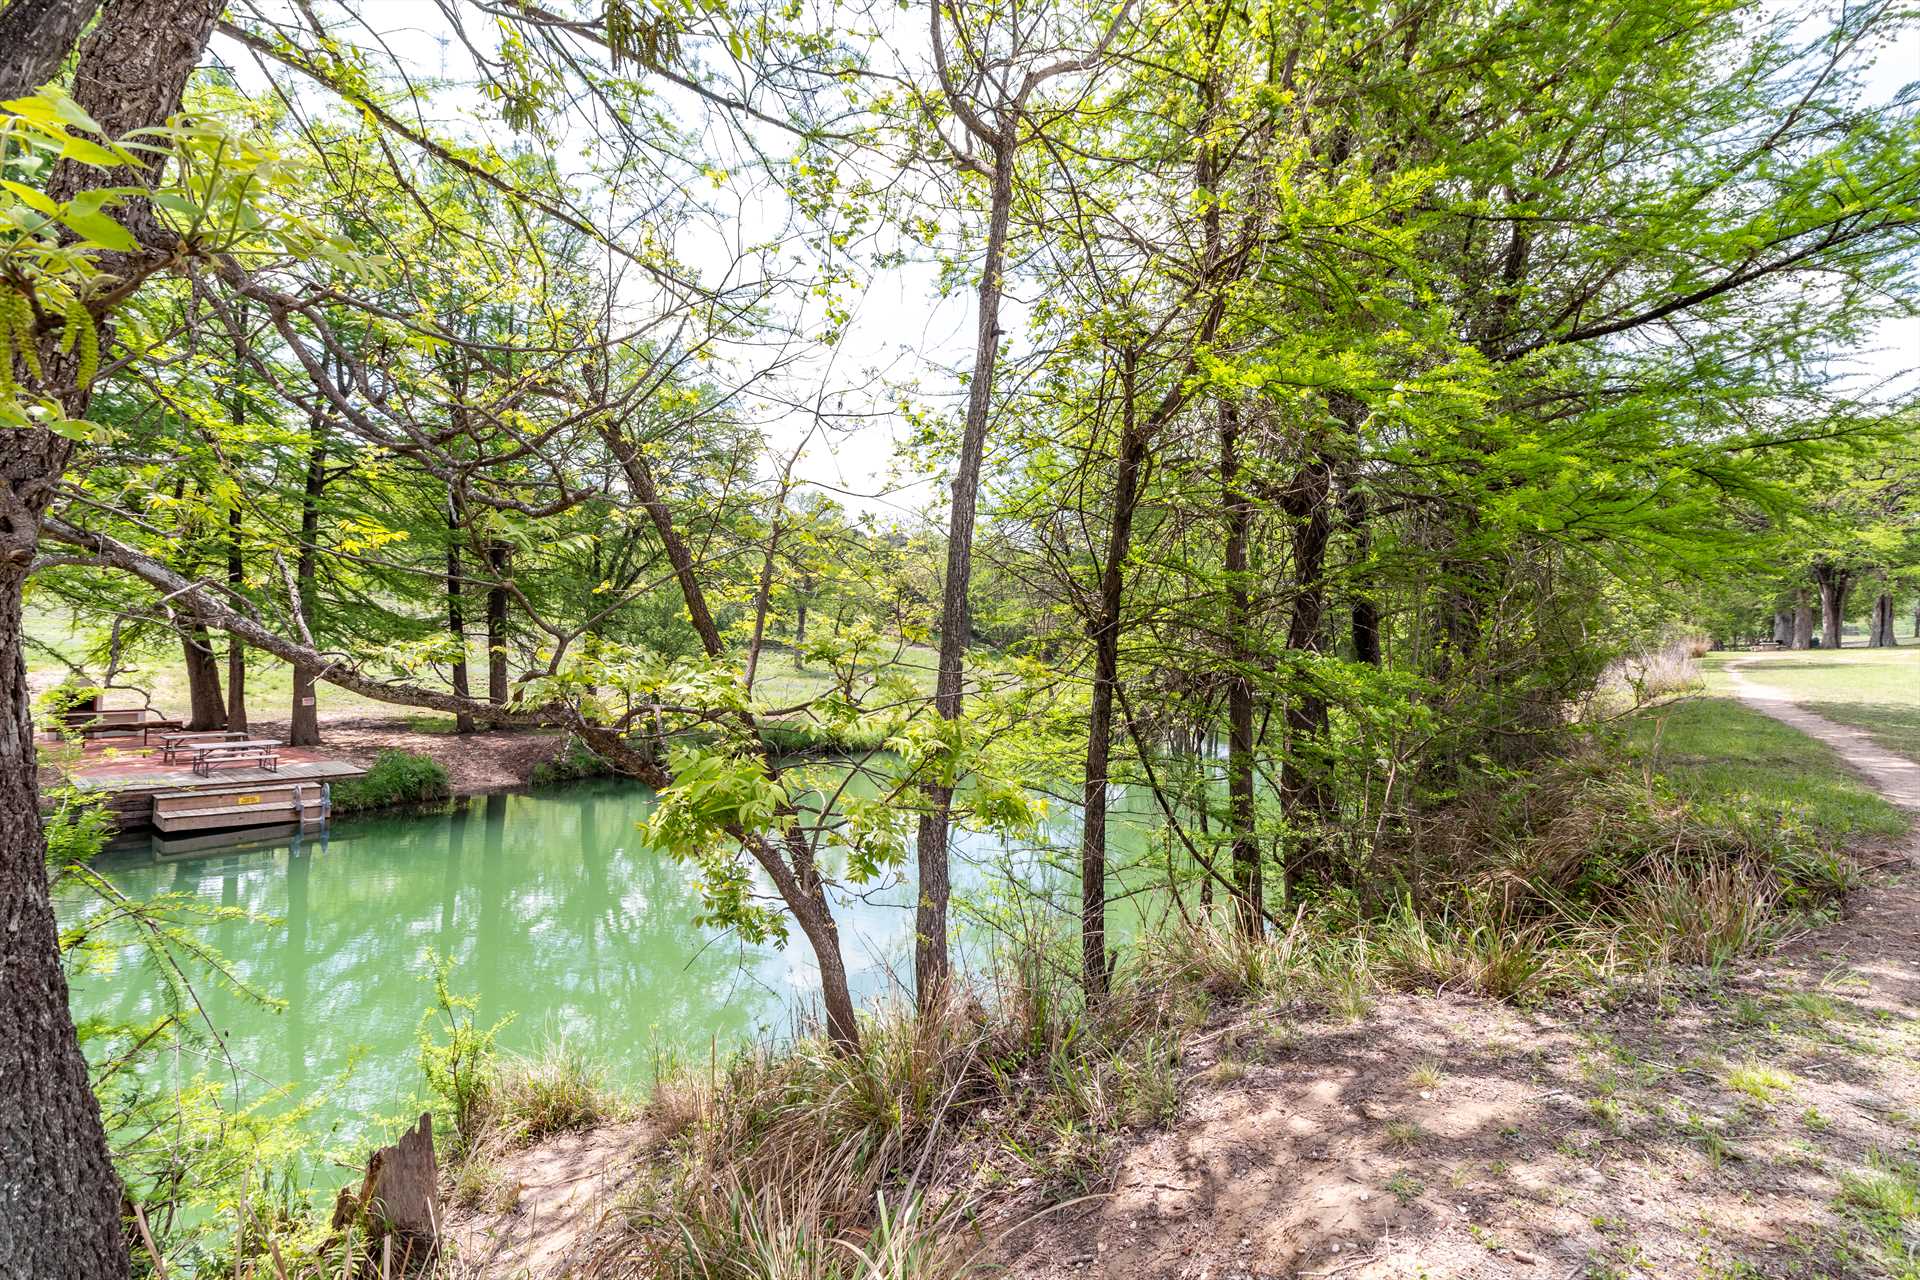                                                 Cypress Star is very close to Bandera City Park, where you can access the Medina River for swimming, tubing, fishing, and more!